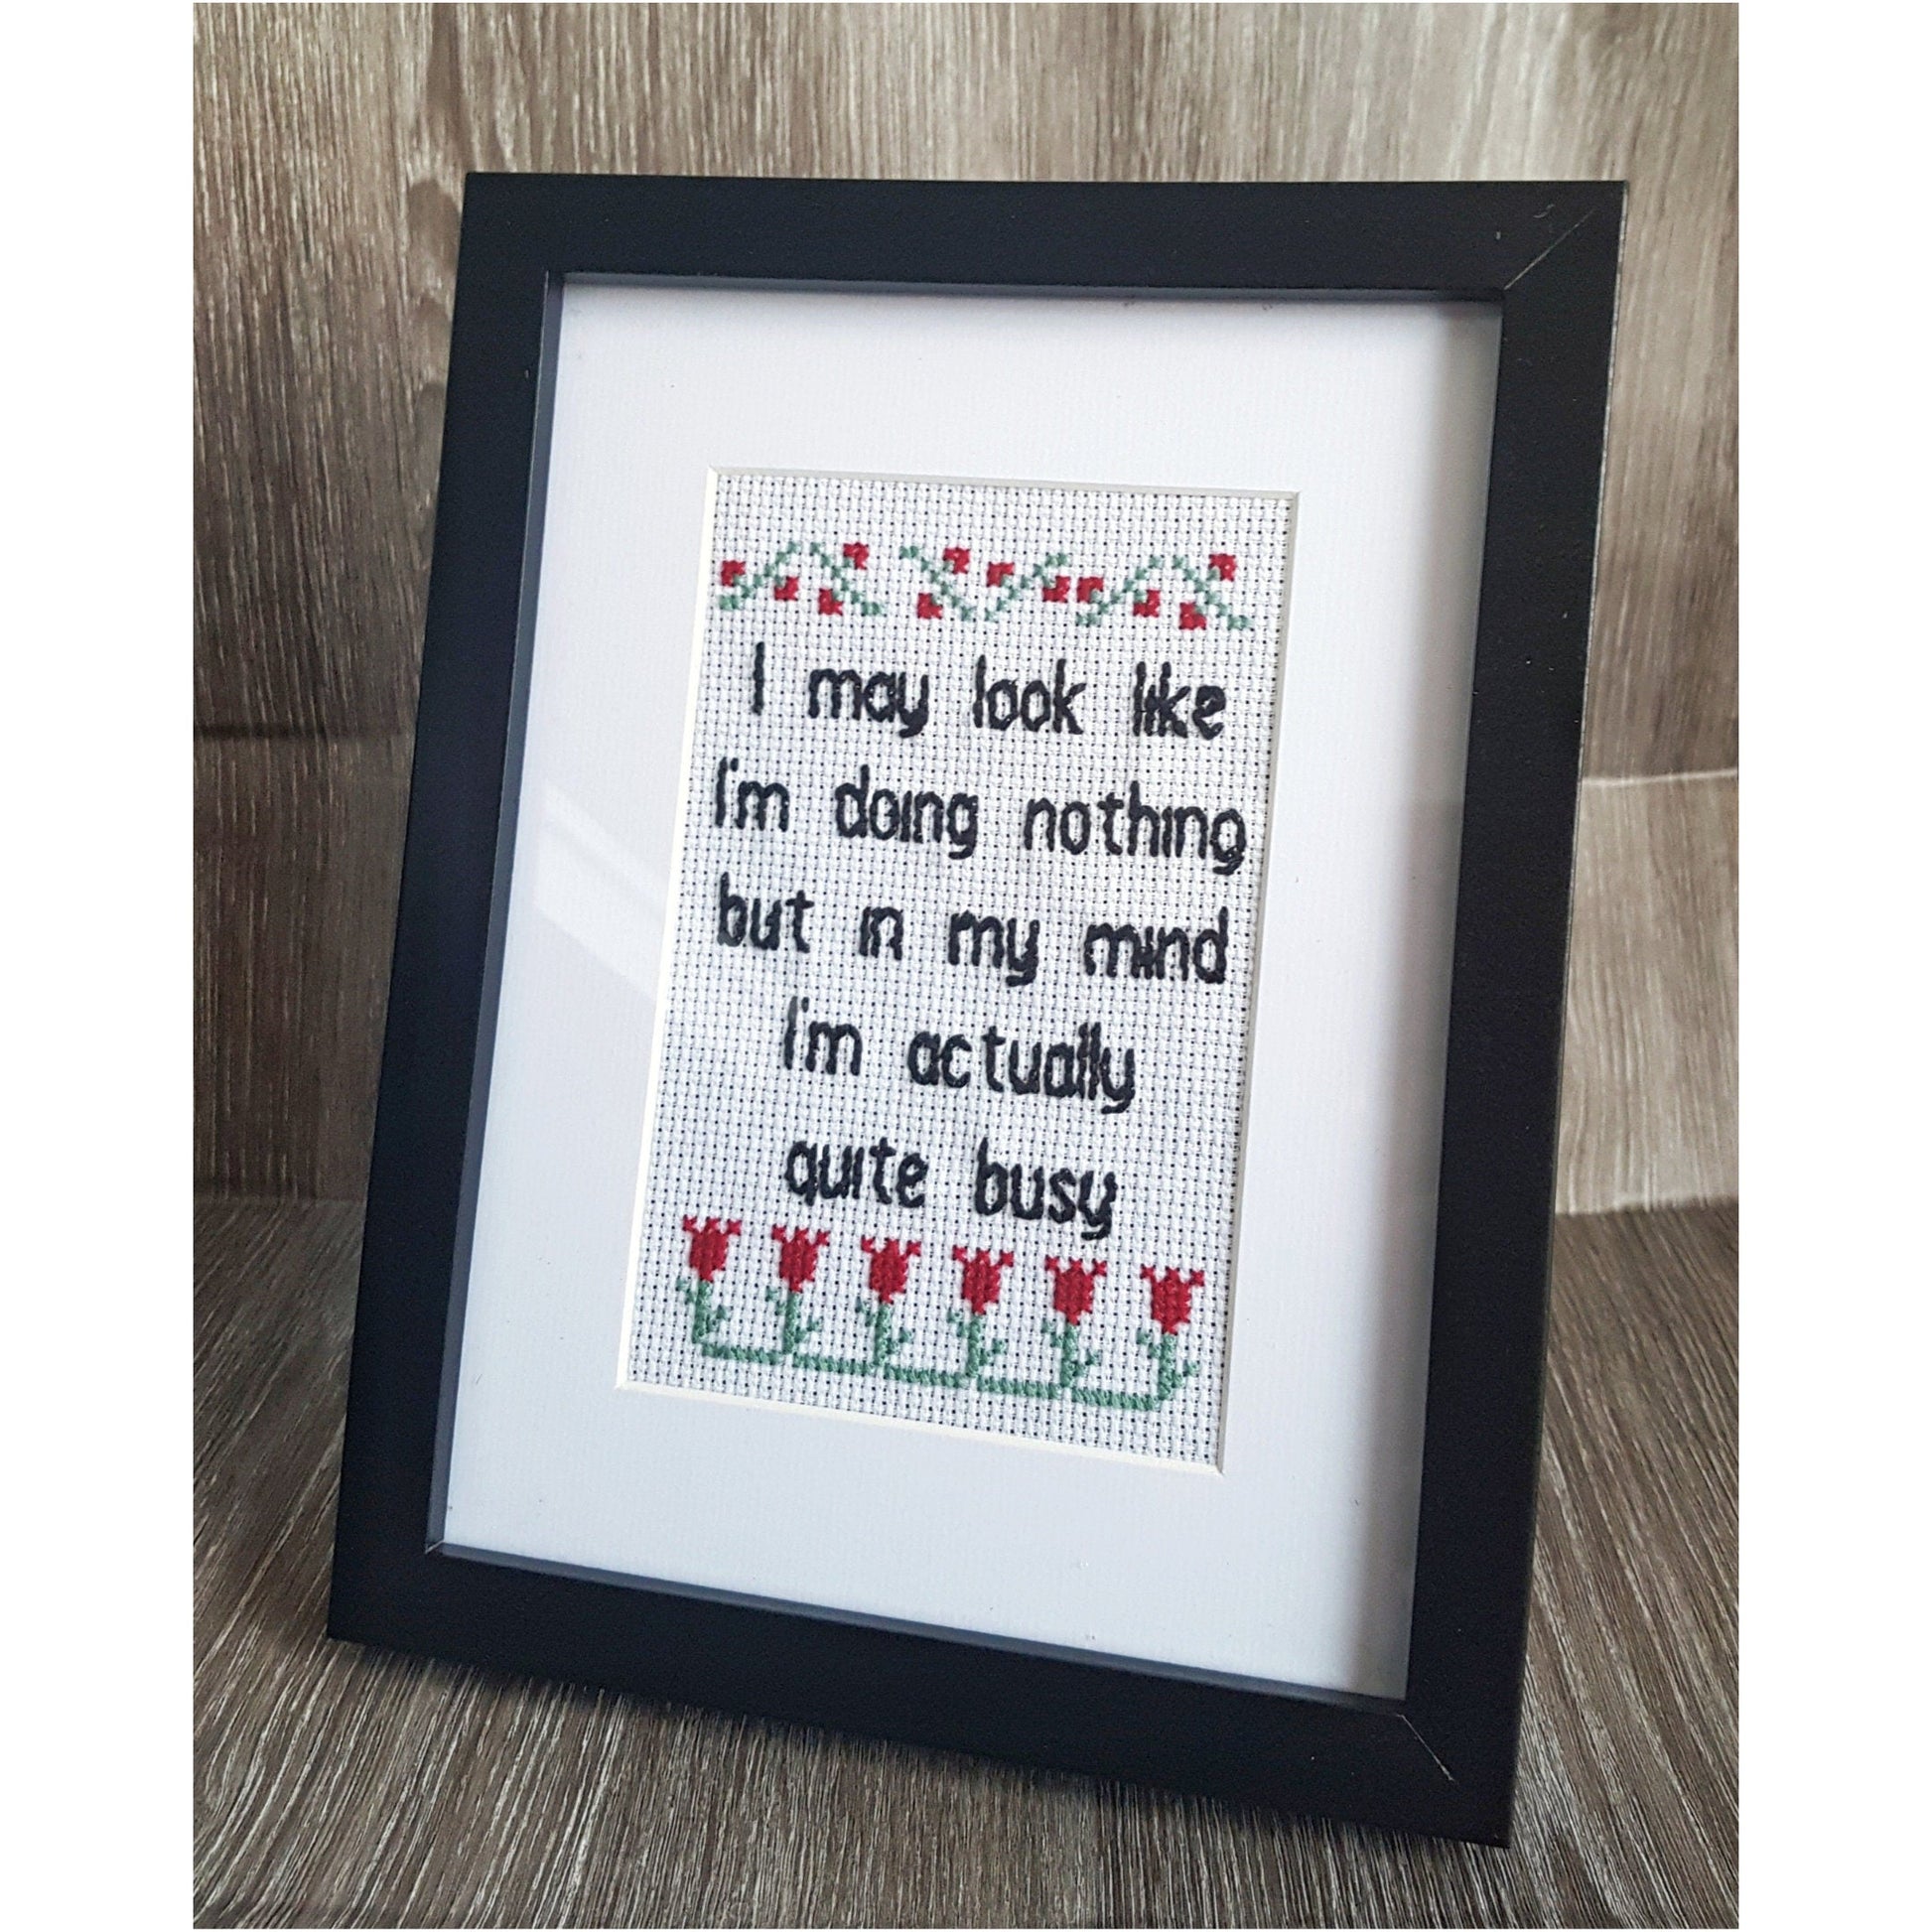 Completed embroidery quote with black text on white background surrounded by red and green flowers. Text says 'I may look like I'm doing nothing but in my mind I'm actually quite busy'. Displayed in black frame with white mount